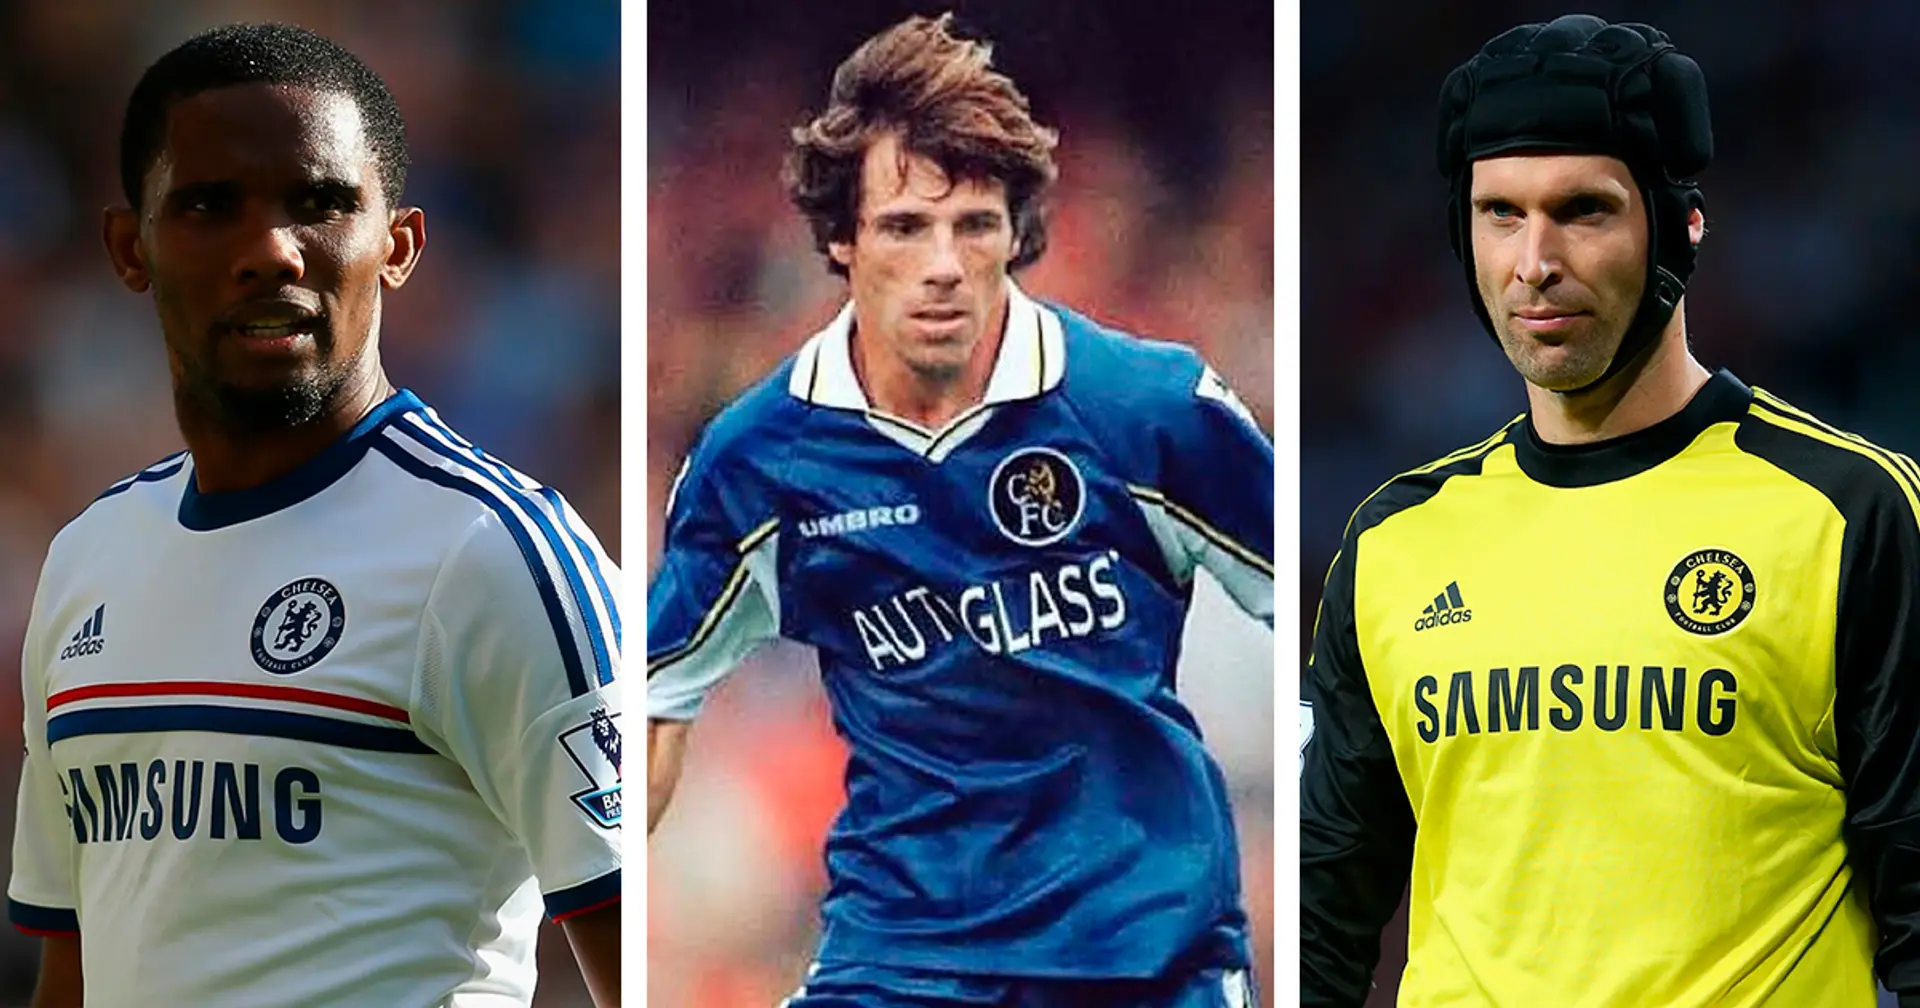 5 traditionally big football-crazy nations that are in massive decline